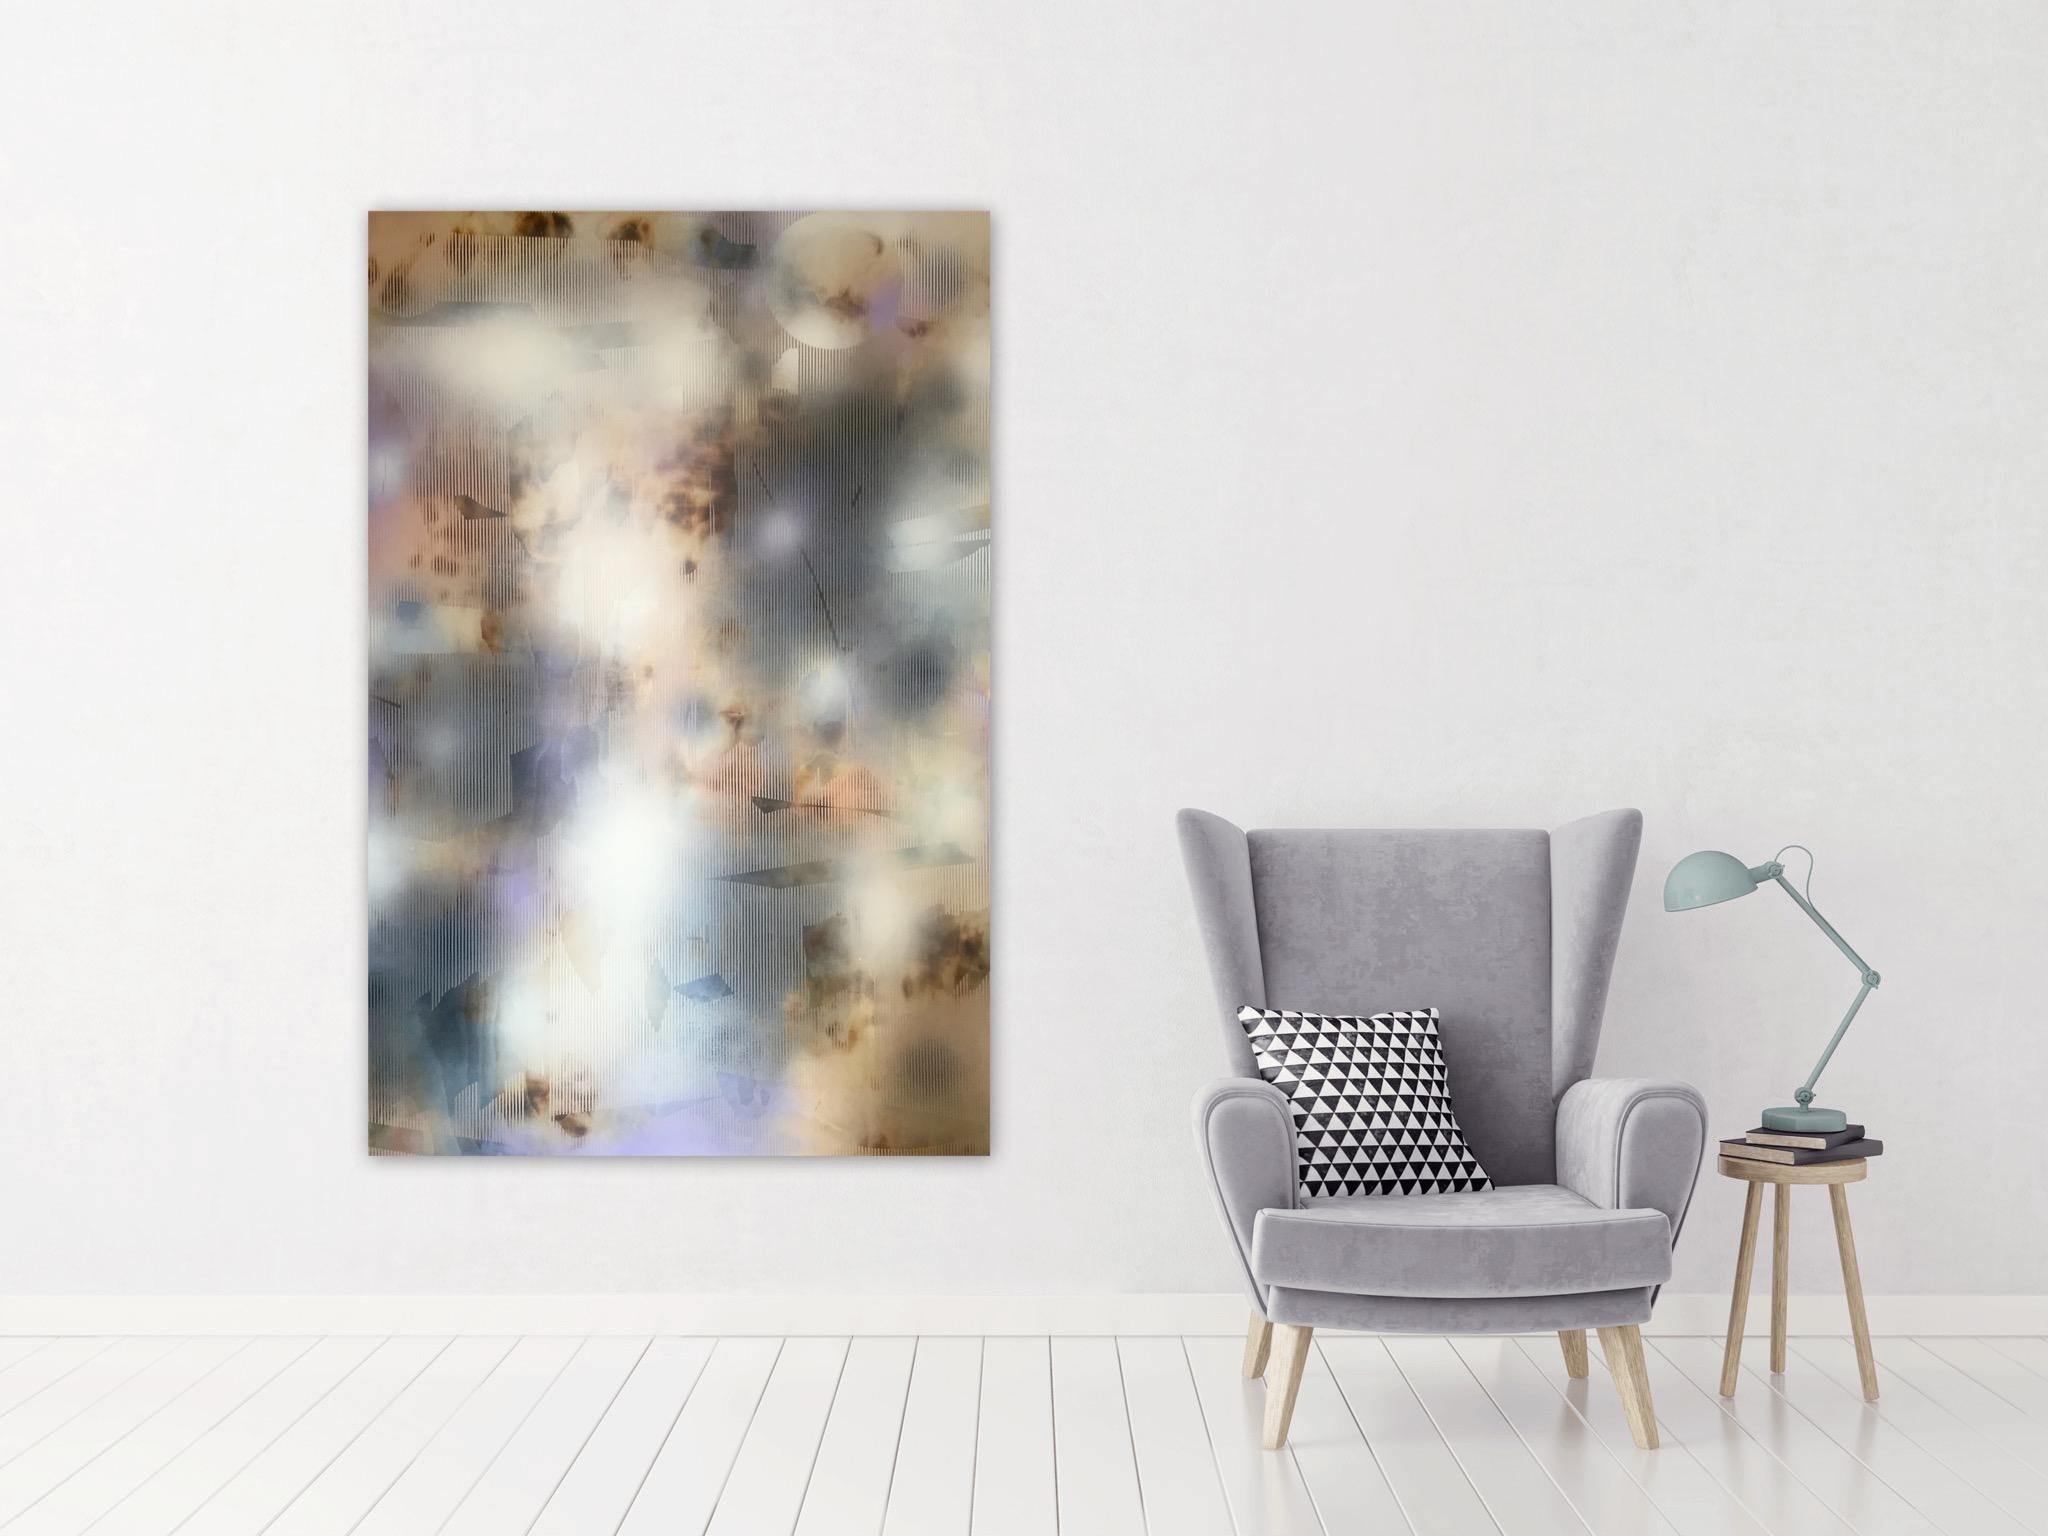 Turbulence 13 (grid painting abstract wood contemporary neutrals atmospheric art - Abstract Geometric Mixed Media Art by Melisa Taylor Metzger